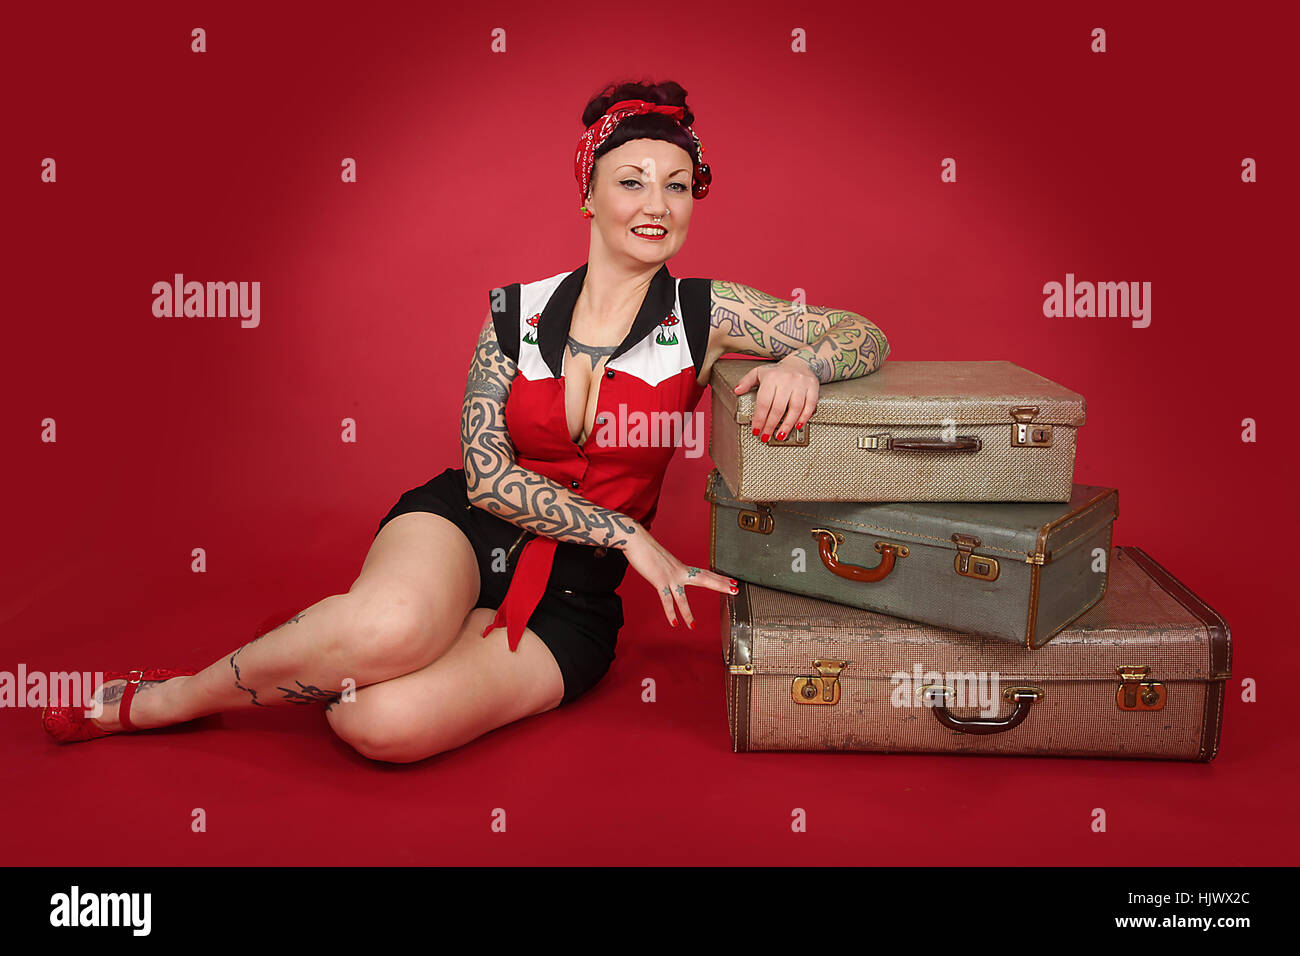 Female woman dressed in a rockabilly fashion posing next to a classic  vehicle Stock Photo - Alamy